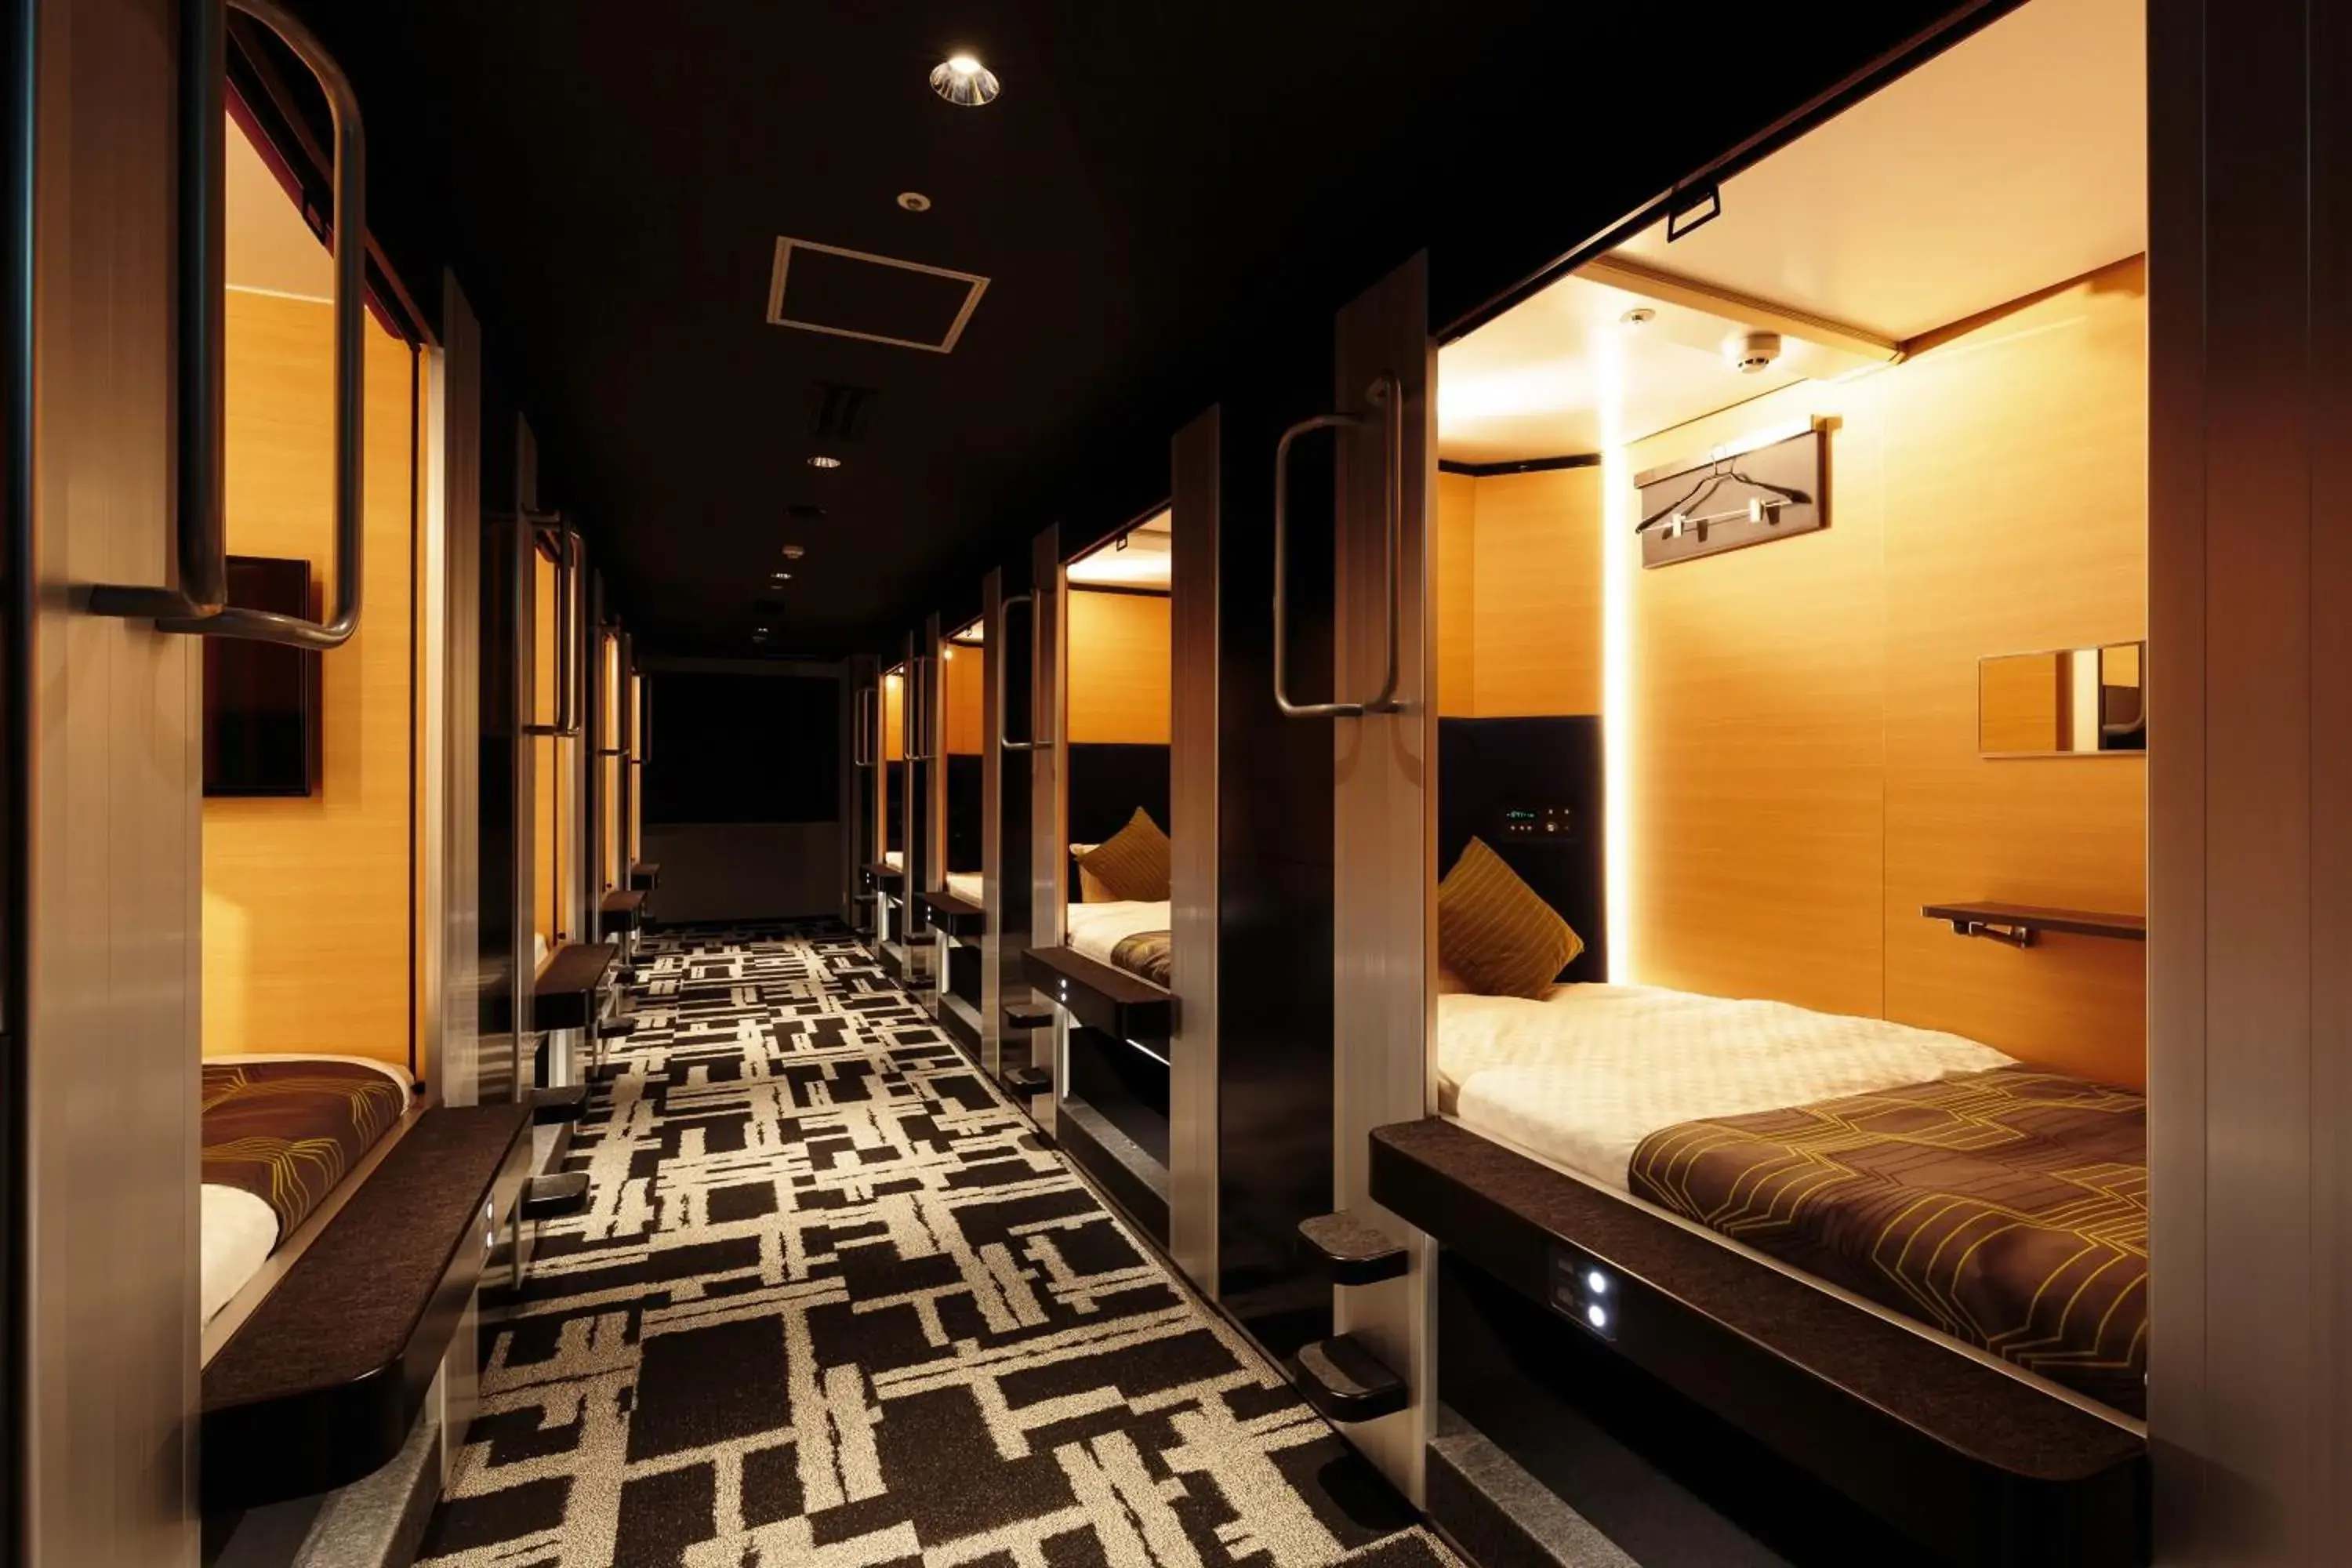 Capsule Room for Female  - single occupancy - House Keeping is Optional with Additional Cost in MyCUBE by MYSTAYS Asakusa Kuramae